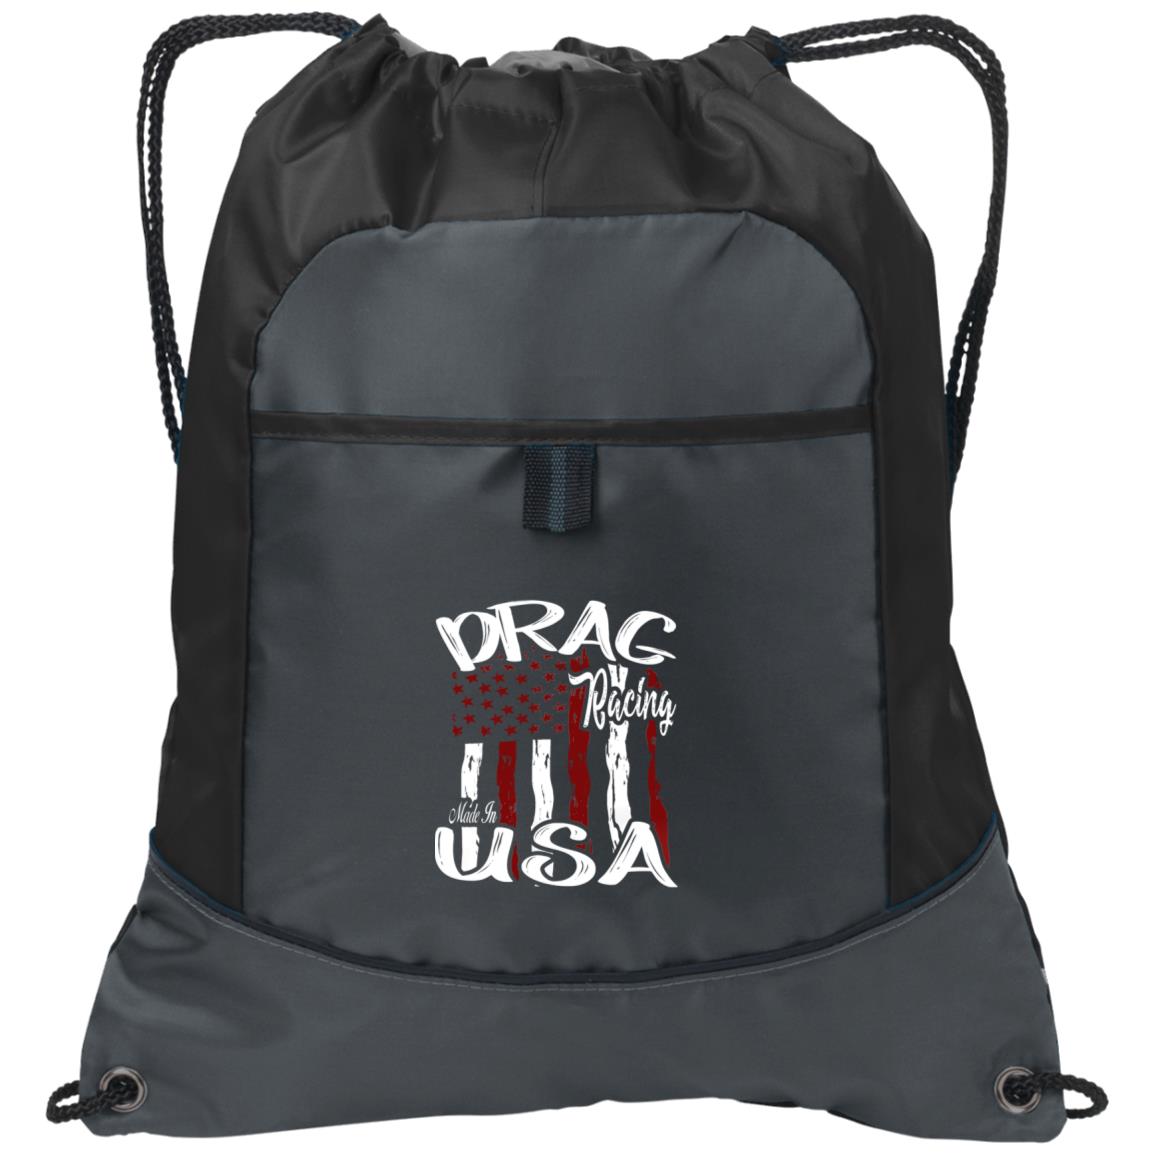 Drag Racing Made In USA Pocket Cinch Pack